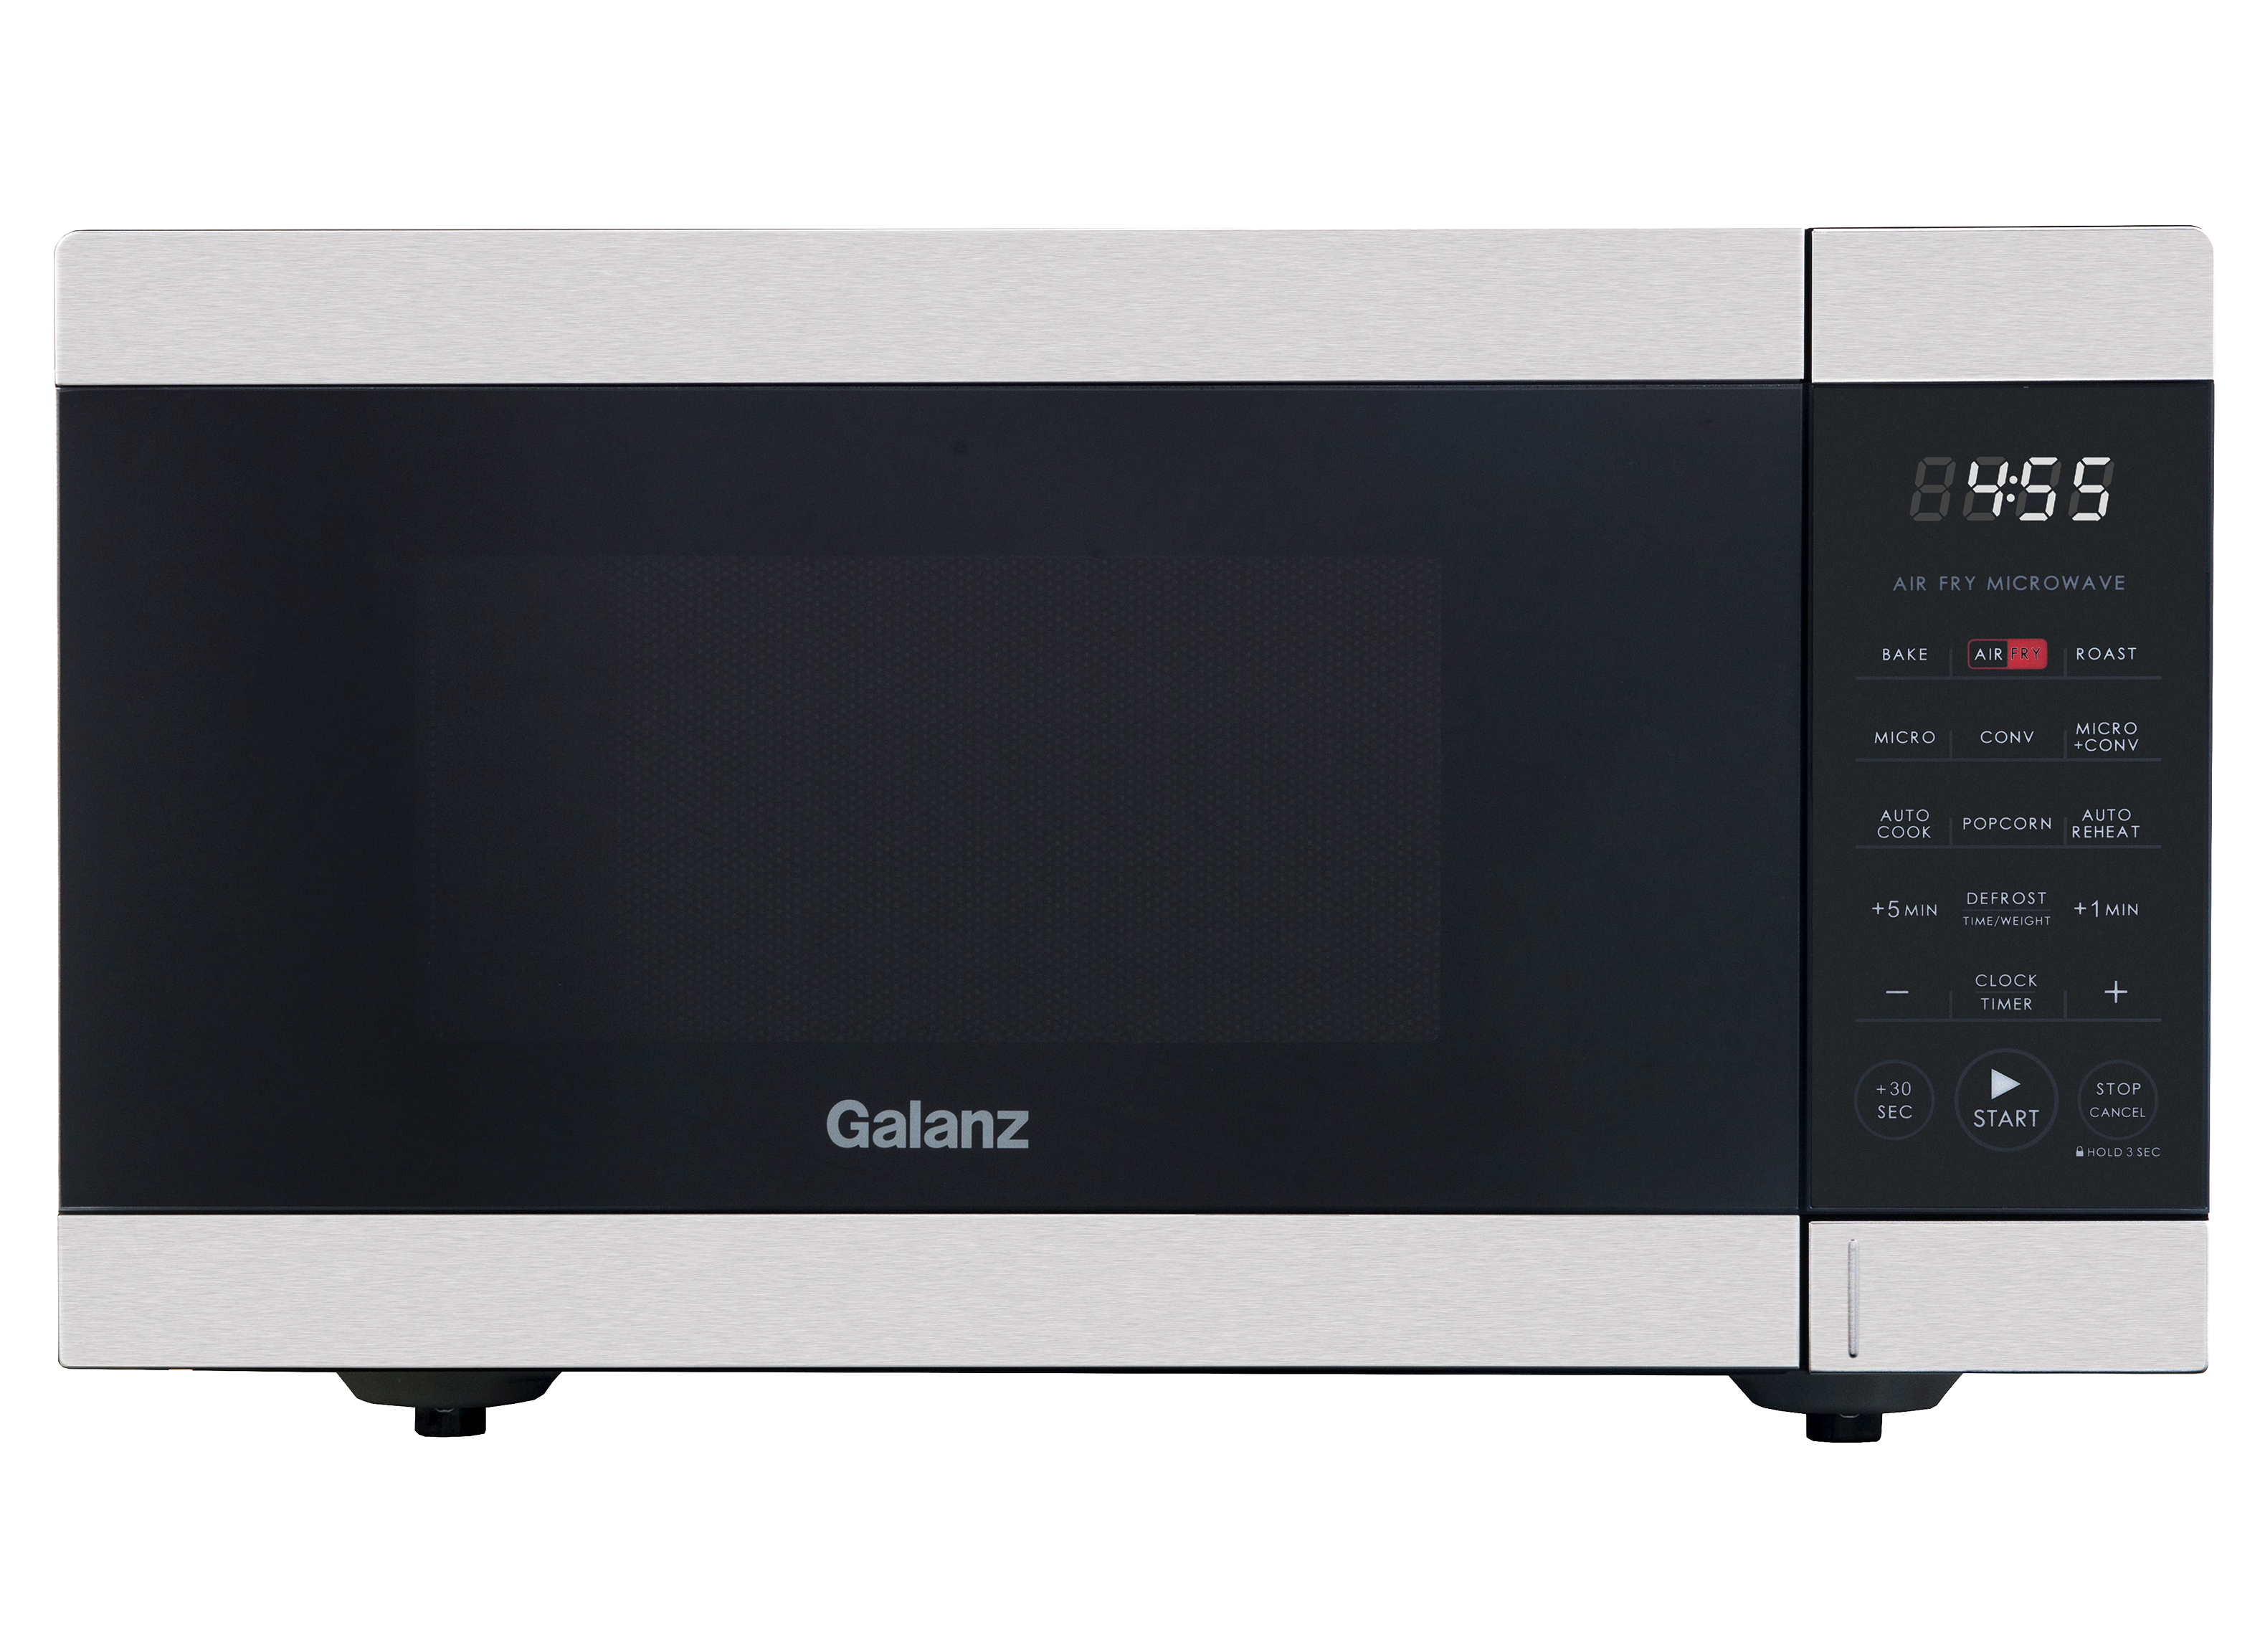 https://crdms.images.consumerreports.org/prod/products/cr/models/405084-large-countertop-microwaves-galanz-gswwd09s1a09a-10024420.png